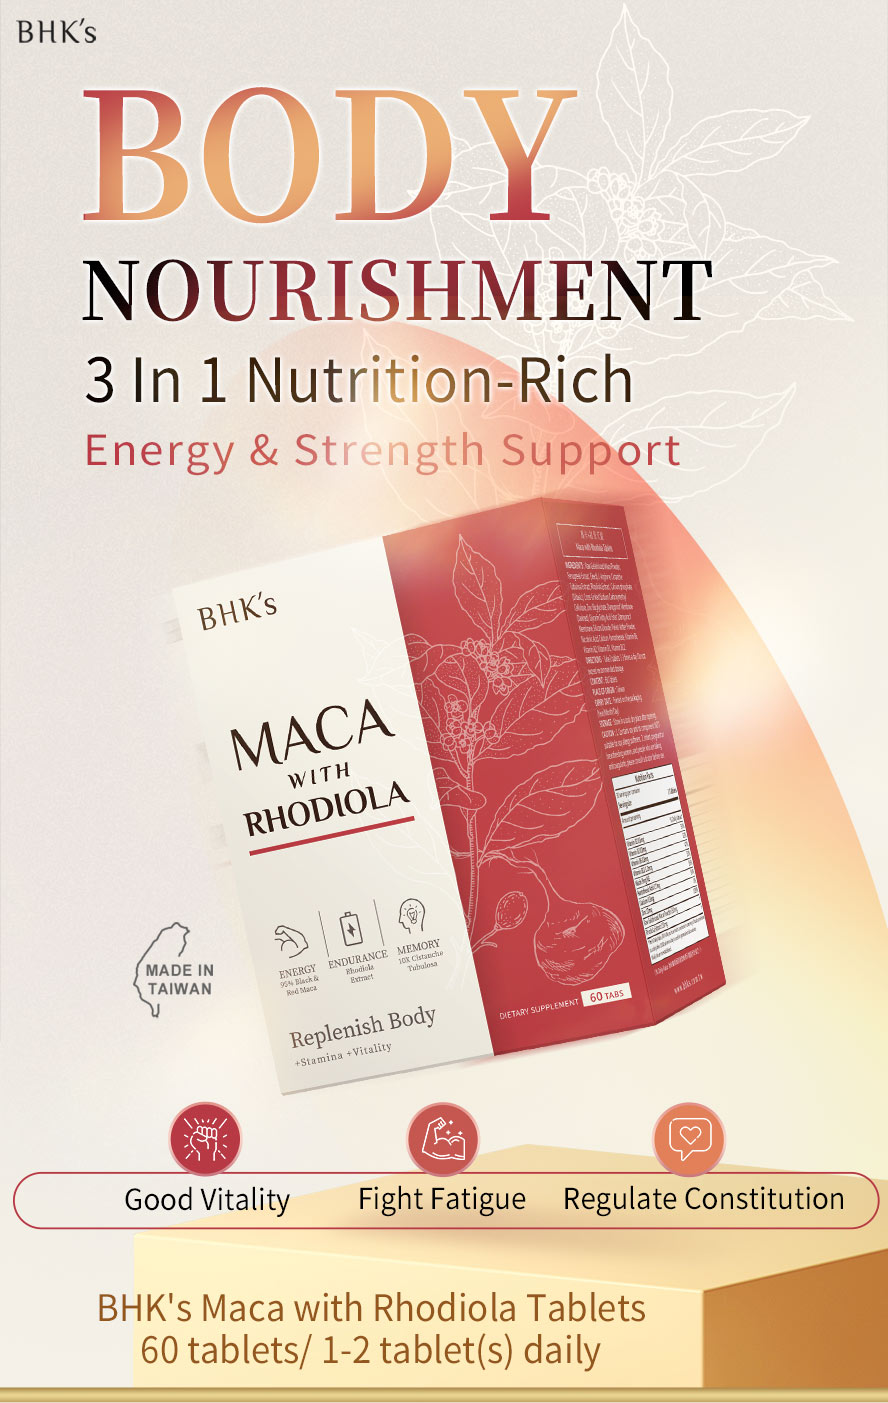 BHK's Maca with Rhodiola is a 3 in 1 nutrition rich body nourishment & energy support to promote good vitality, fight fatigue, and regulate constitution for better body physique